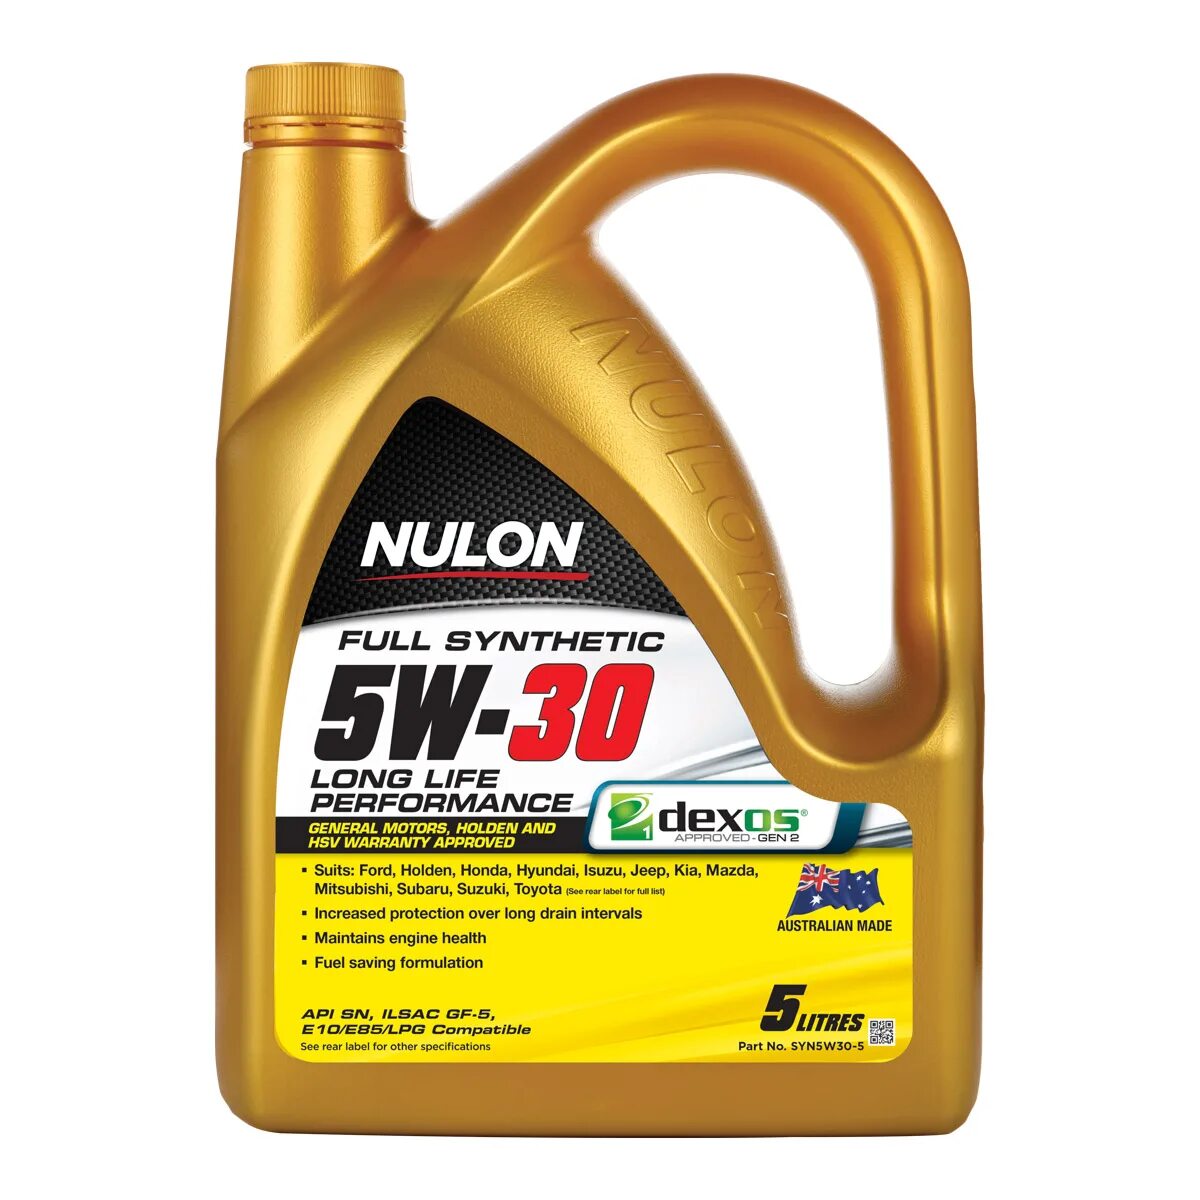 Масло 5w30 long life. CWORKS Oil fully Synthetic 5 40. Energy conserving Oil 5w30. Мазда Голден 5w30. Engine Oil 5w-30.